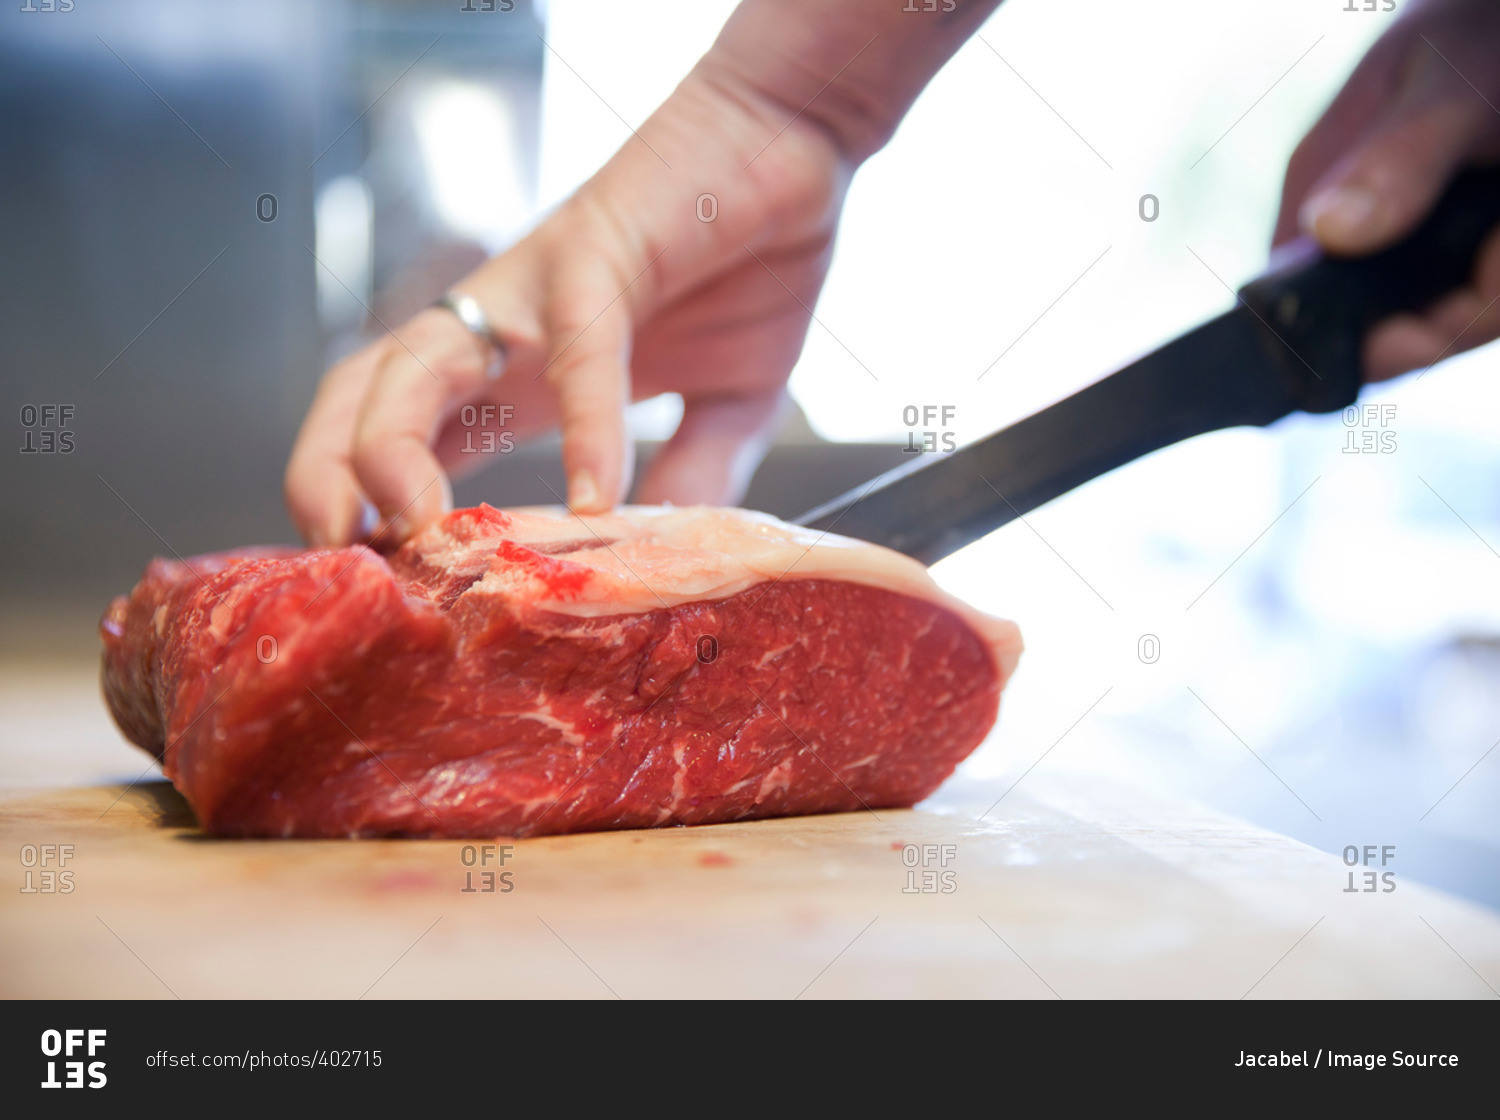 Close up of butchers hands slicing raw steak on butchers block